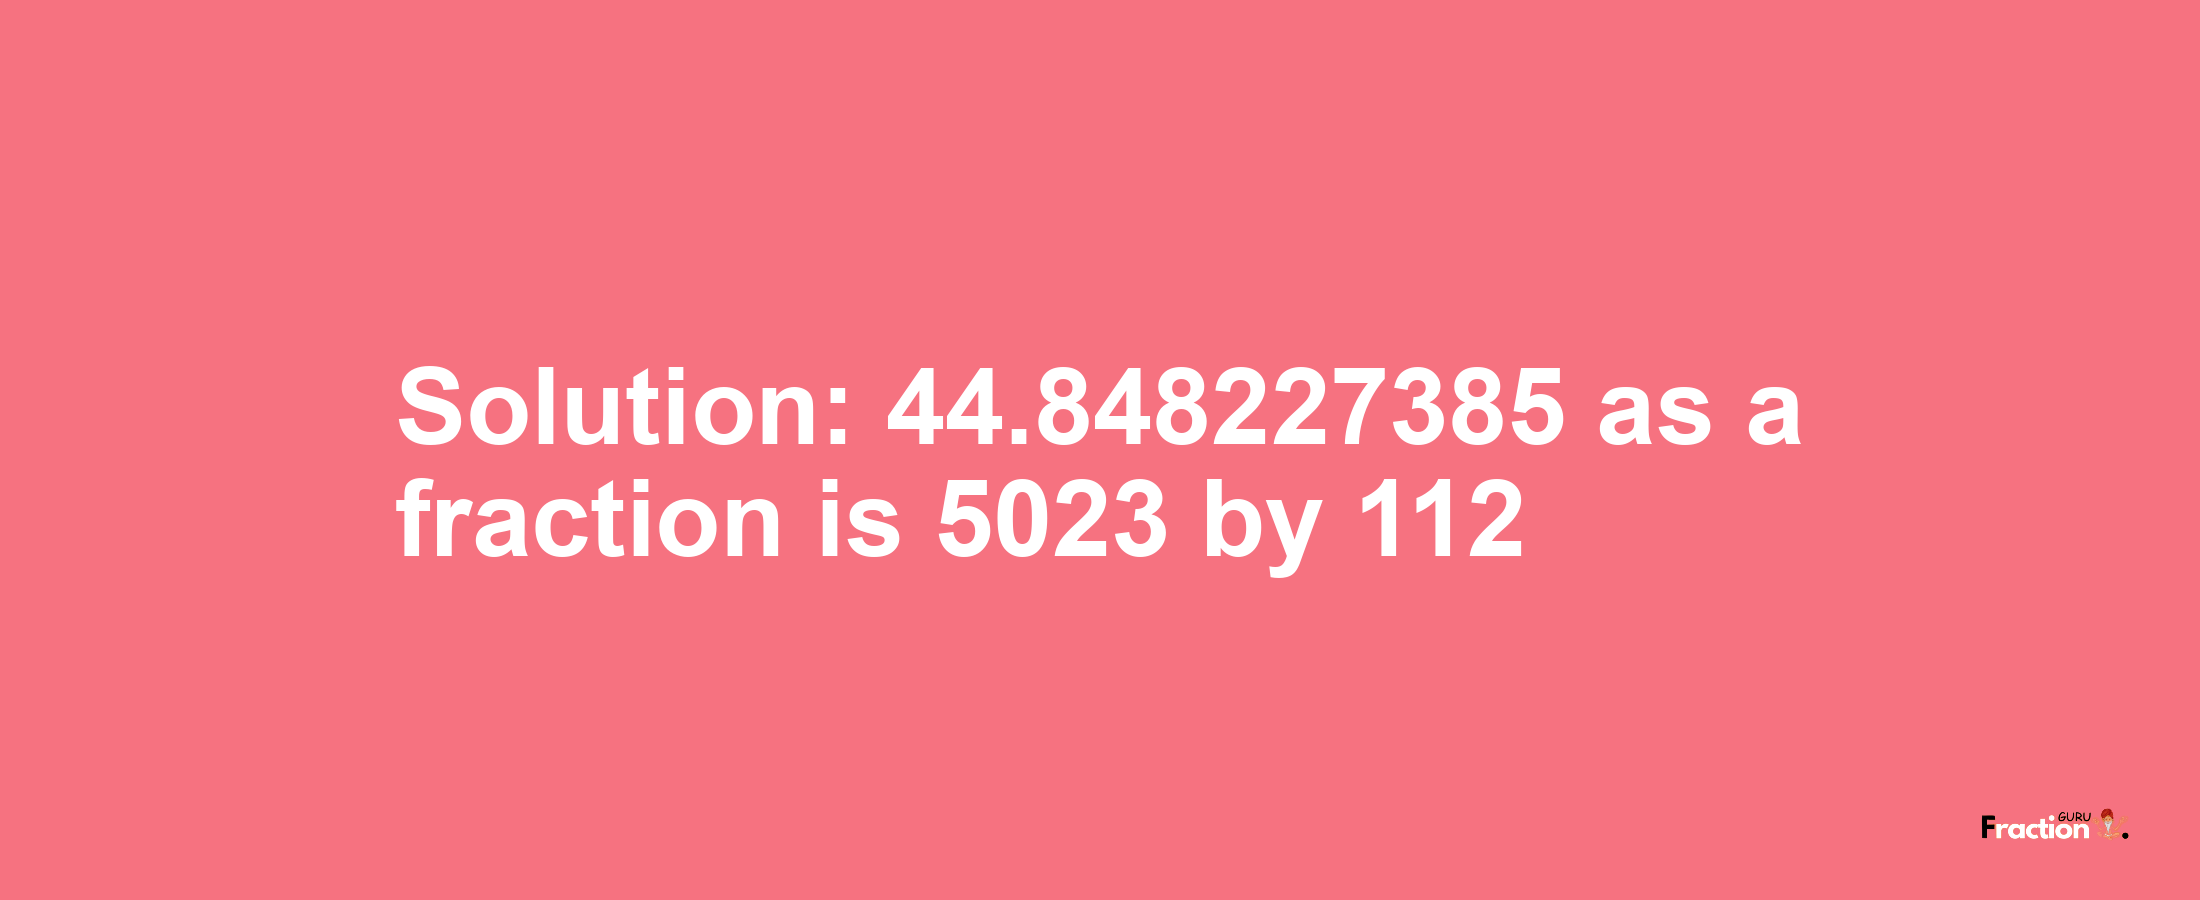 Solution:44.848227385 as a fraction is 5023/112